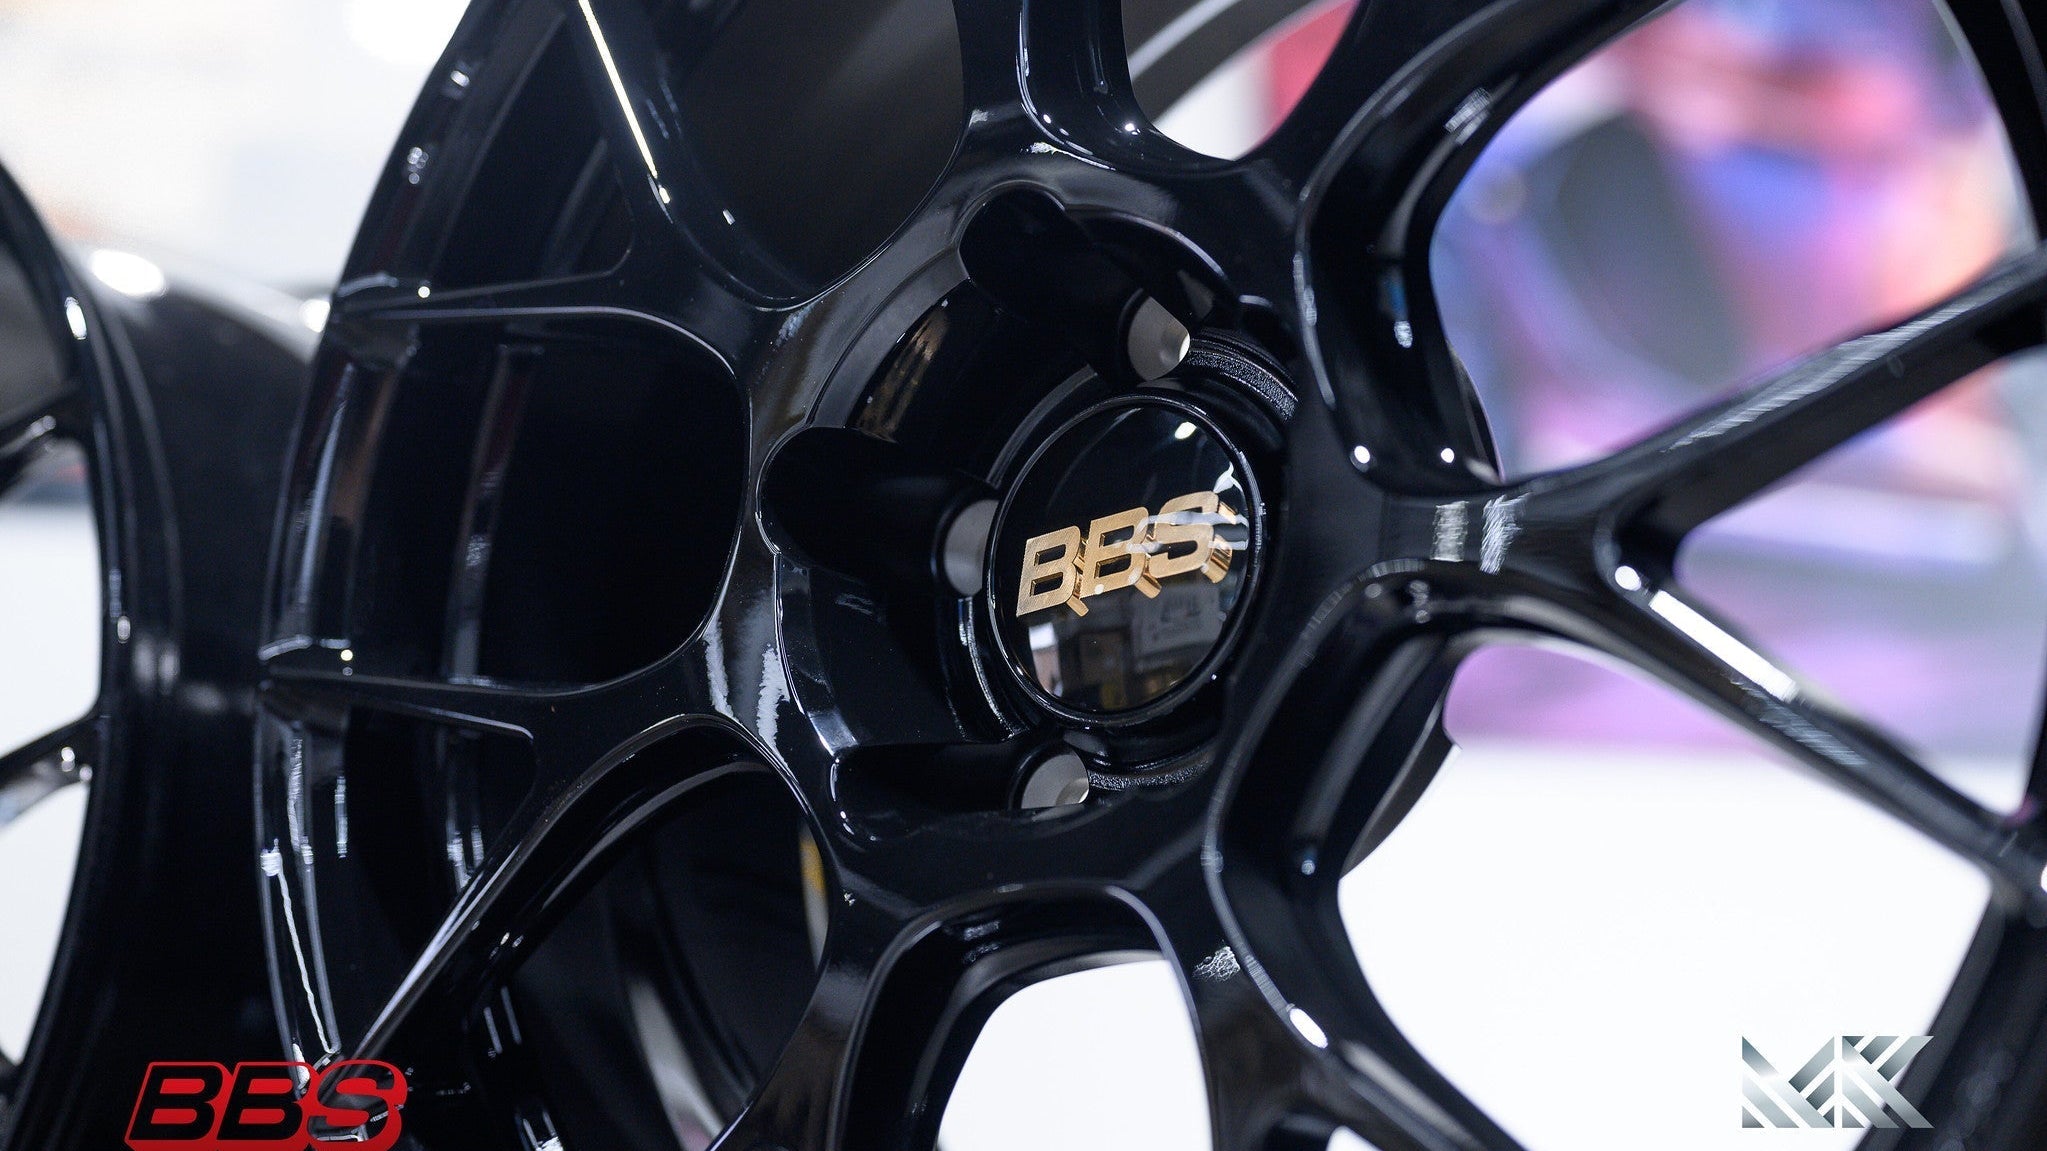 BBS RE-V7 for 8Y RS3 - Premium Wheels from BBS Japan - From just $5790.0! Shop now at MK MOTORSPORTS